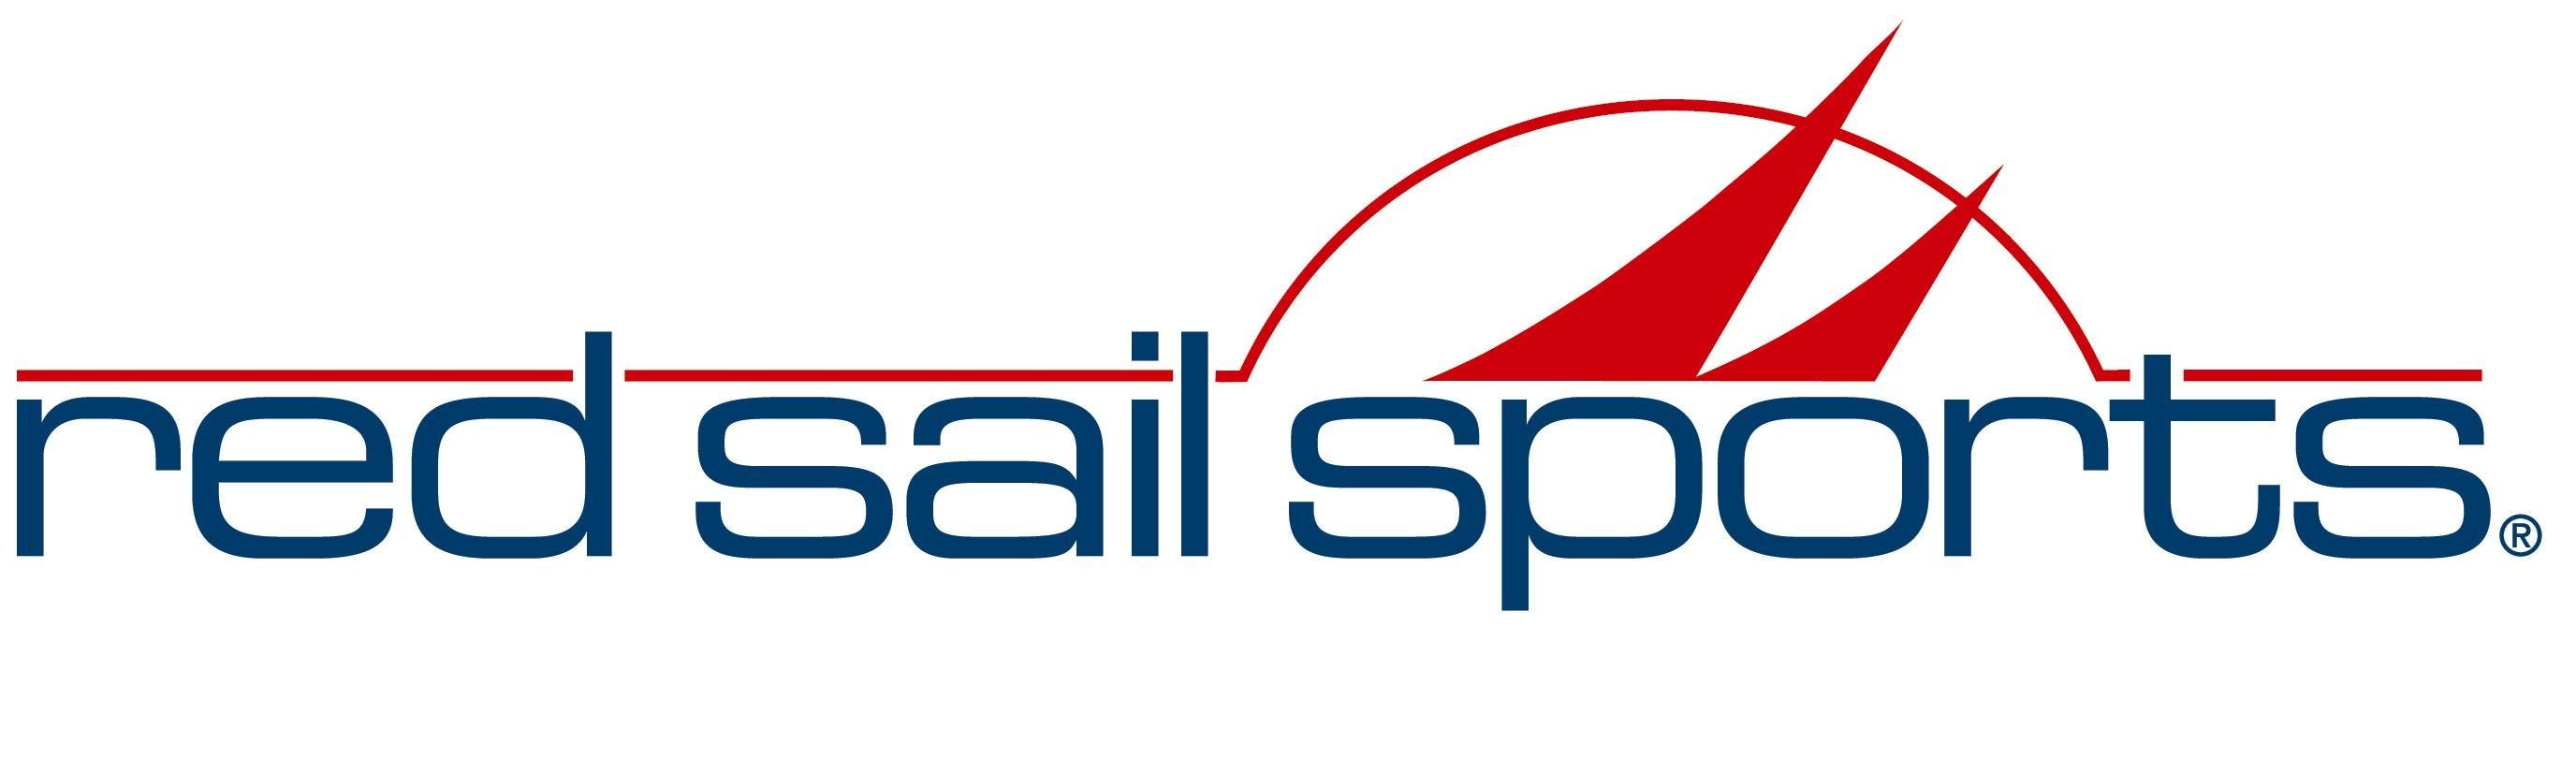 Red Sail Sports